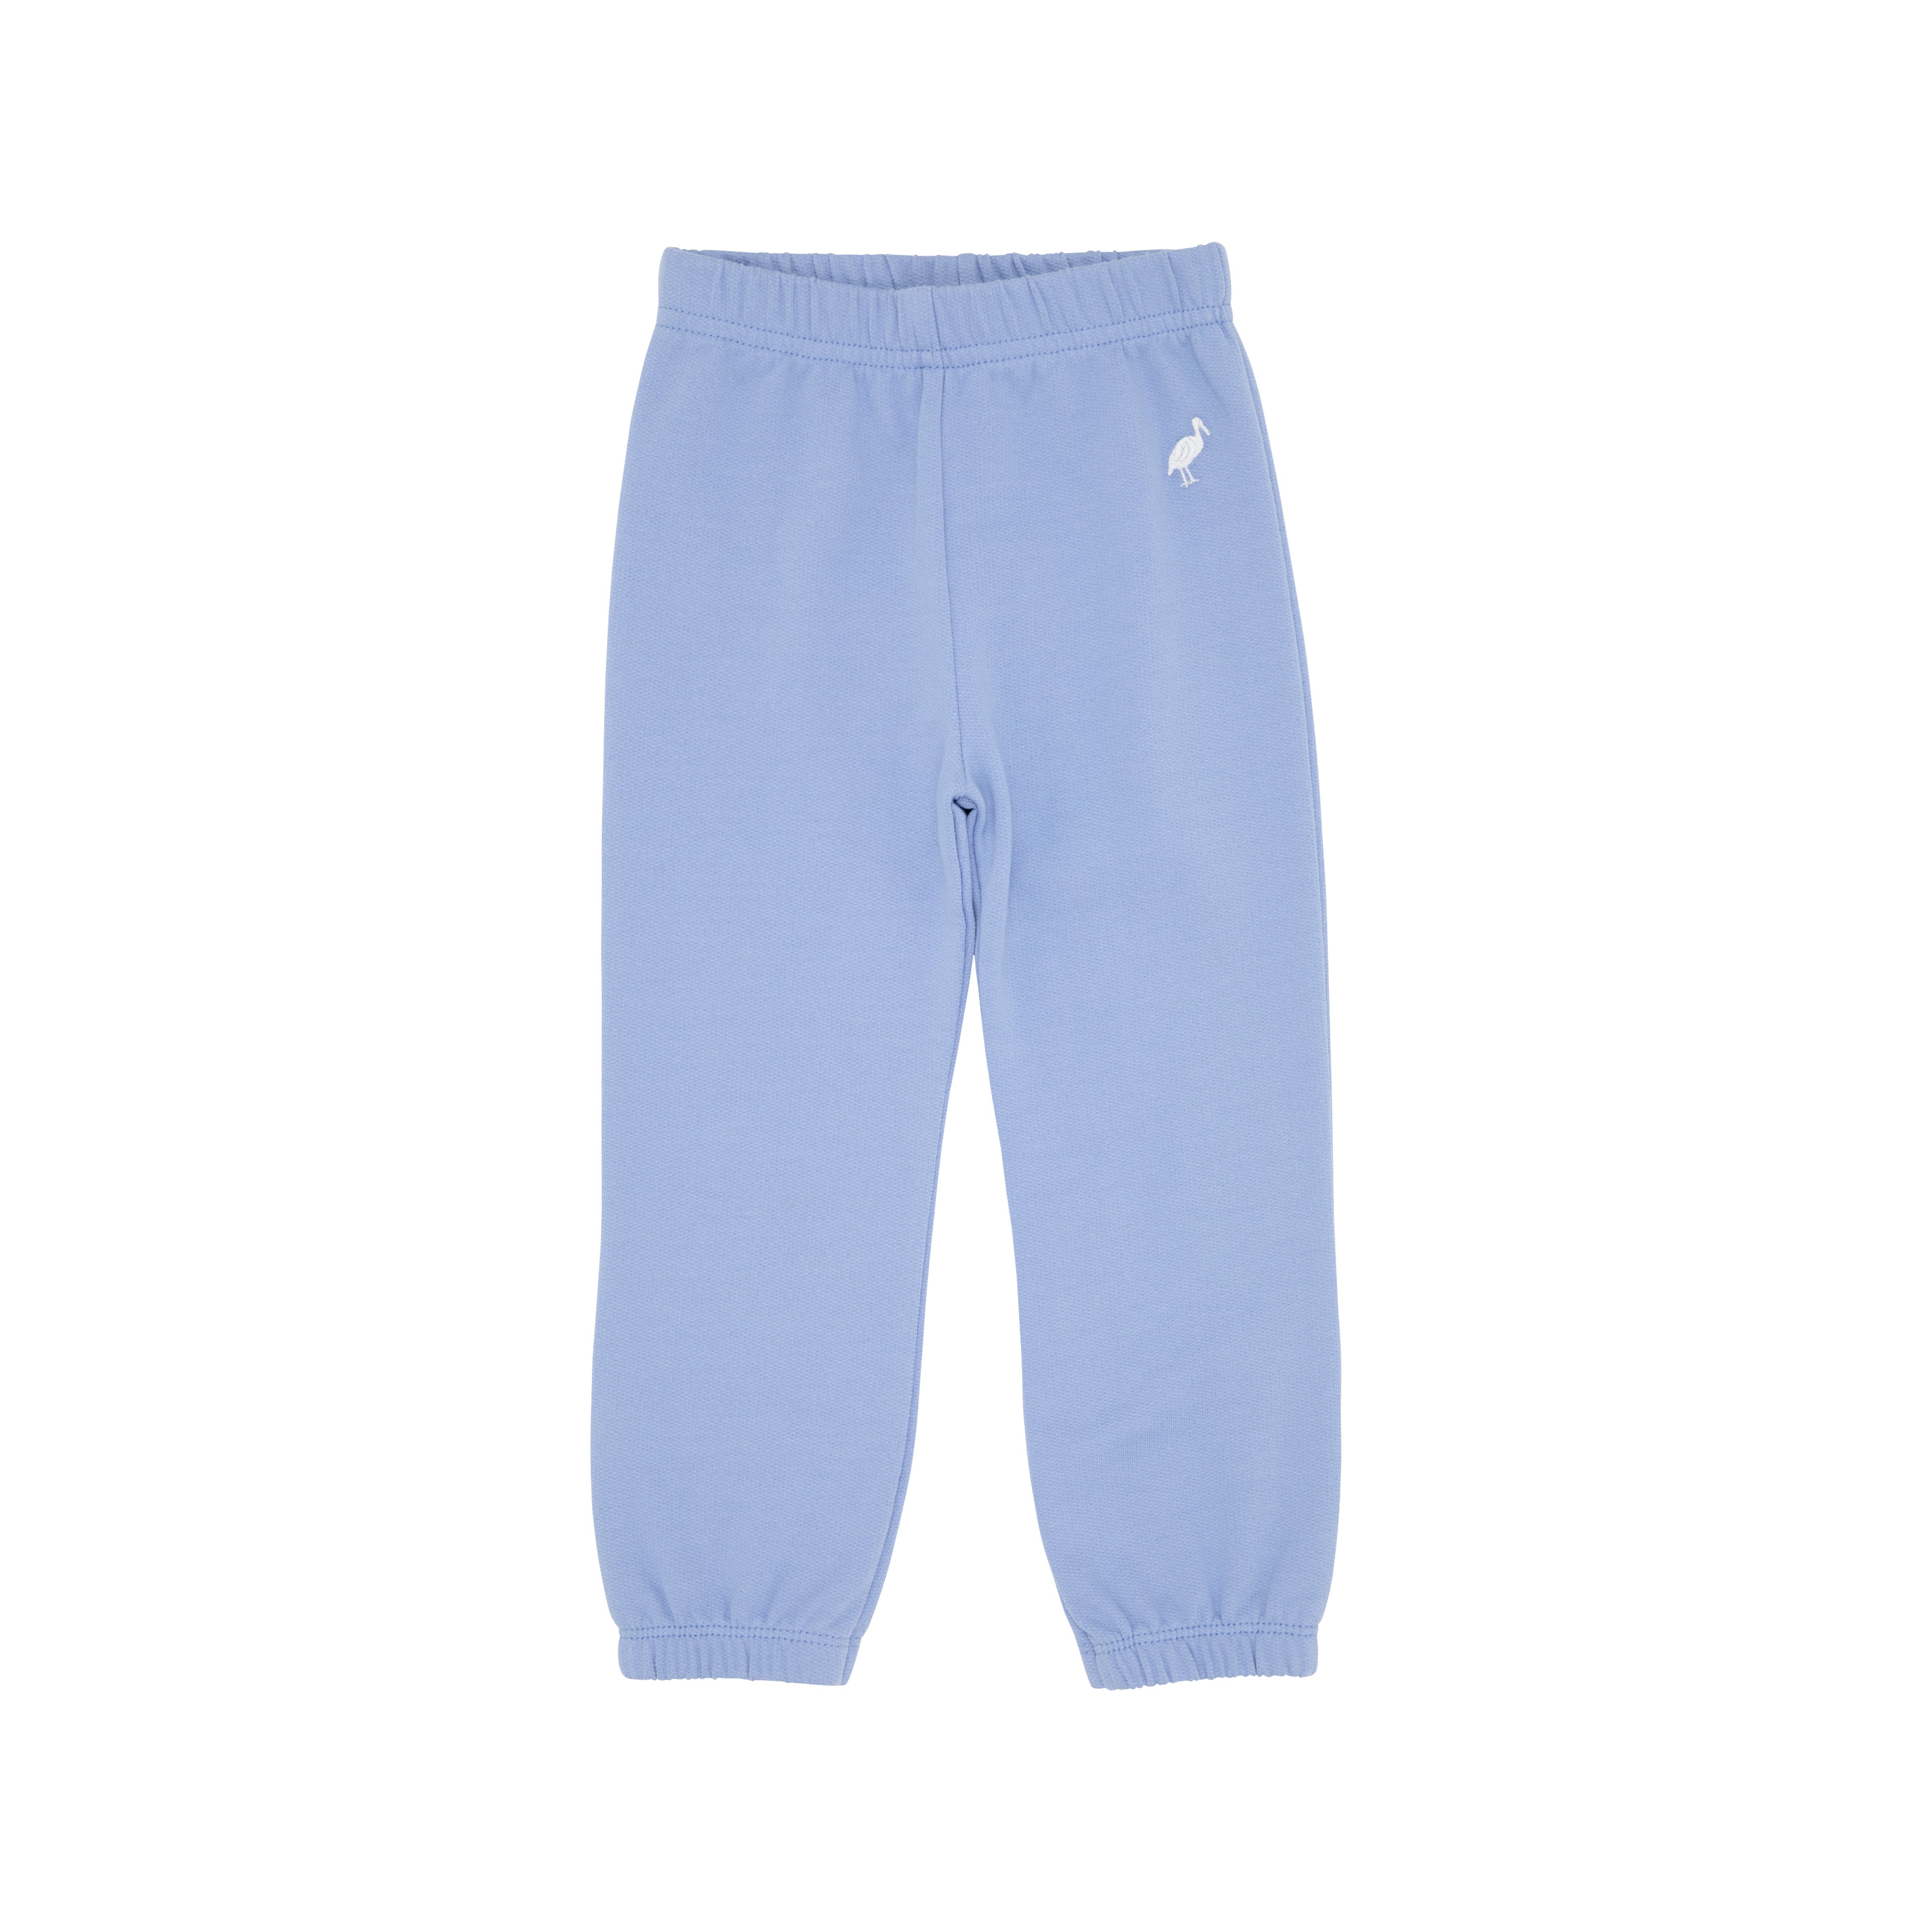 Gates Sweeney Sweatpants - Park City Periwinkle with Worth Avenue Whit ...